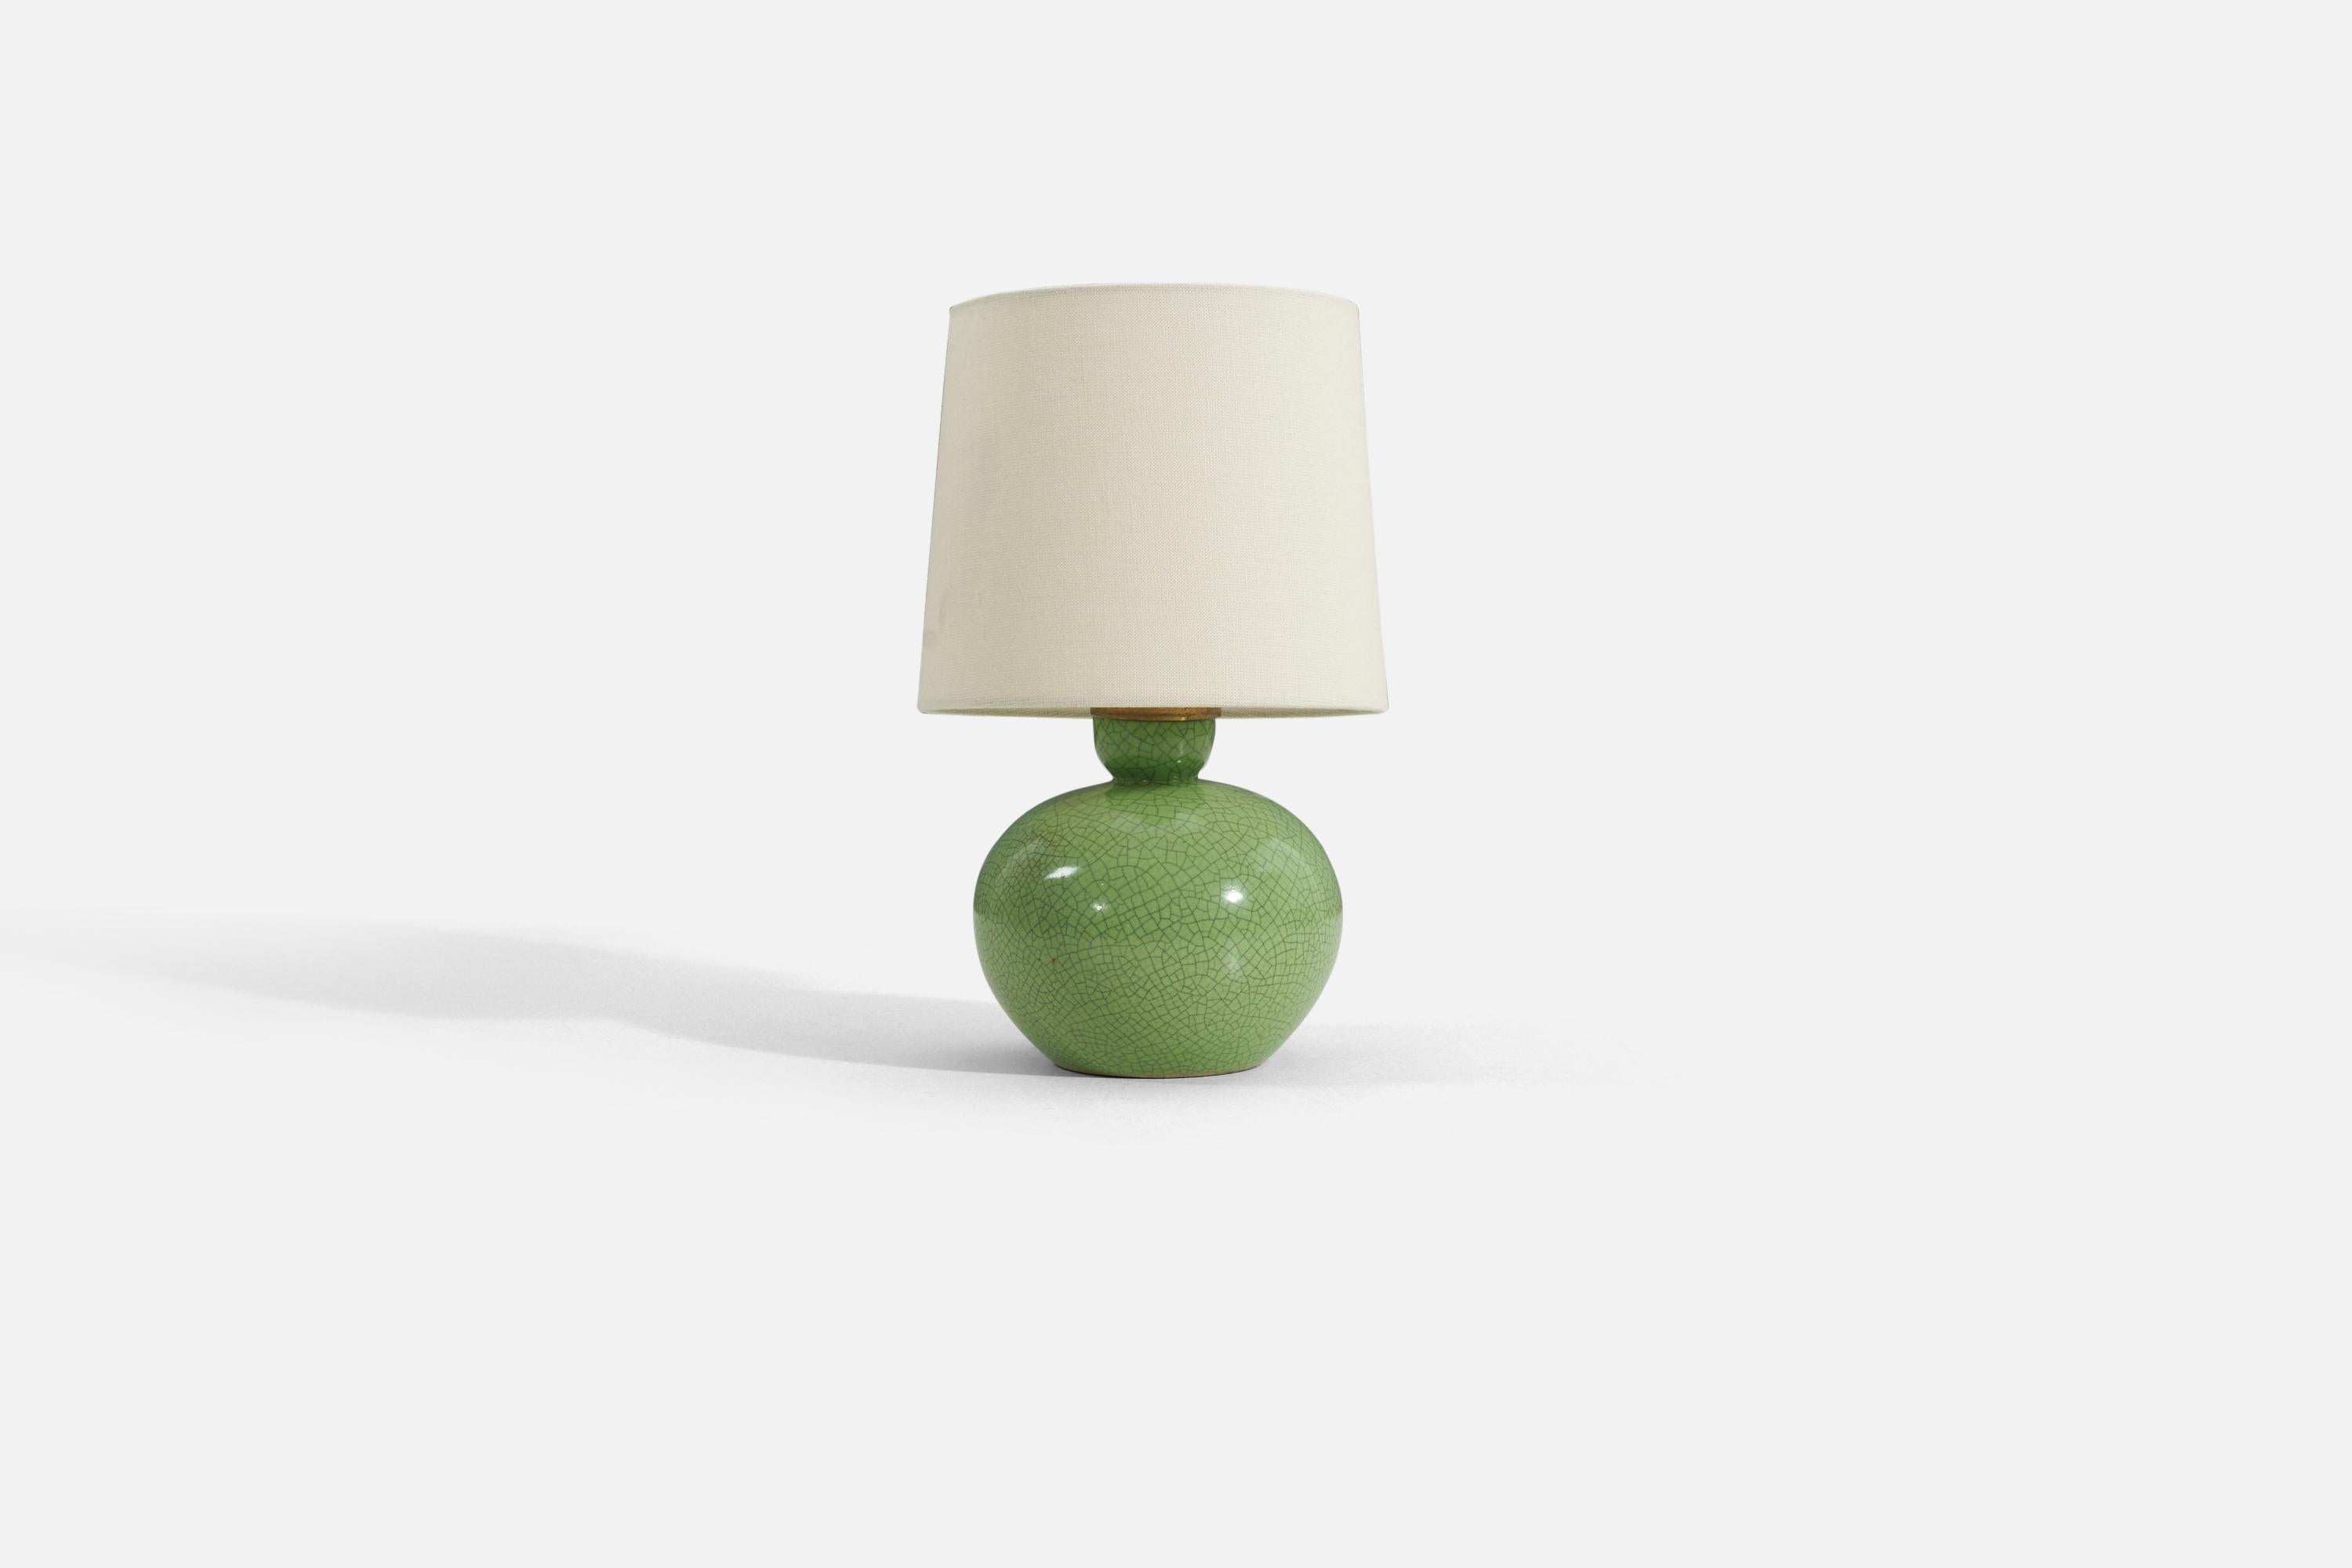 A green crackle-glazed earthenware table lamp designed and produced in Sweden, 1940s.

Sold without lampshade. Measurements listed are of lamp only. 

For reference. additional dimensions below. 
Shade : 7 x 8 x 7
Lamp with shade : 13.25 x 8 x